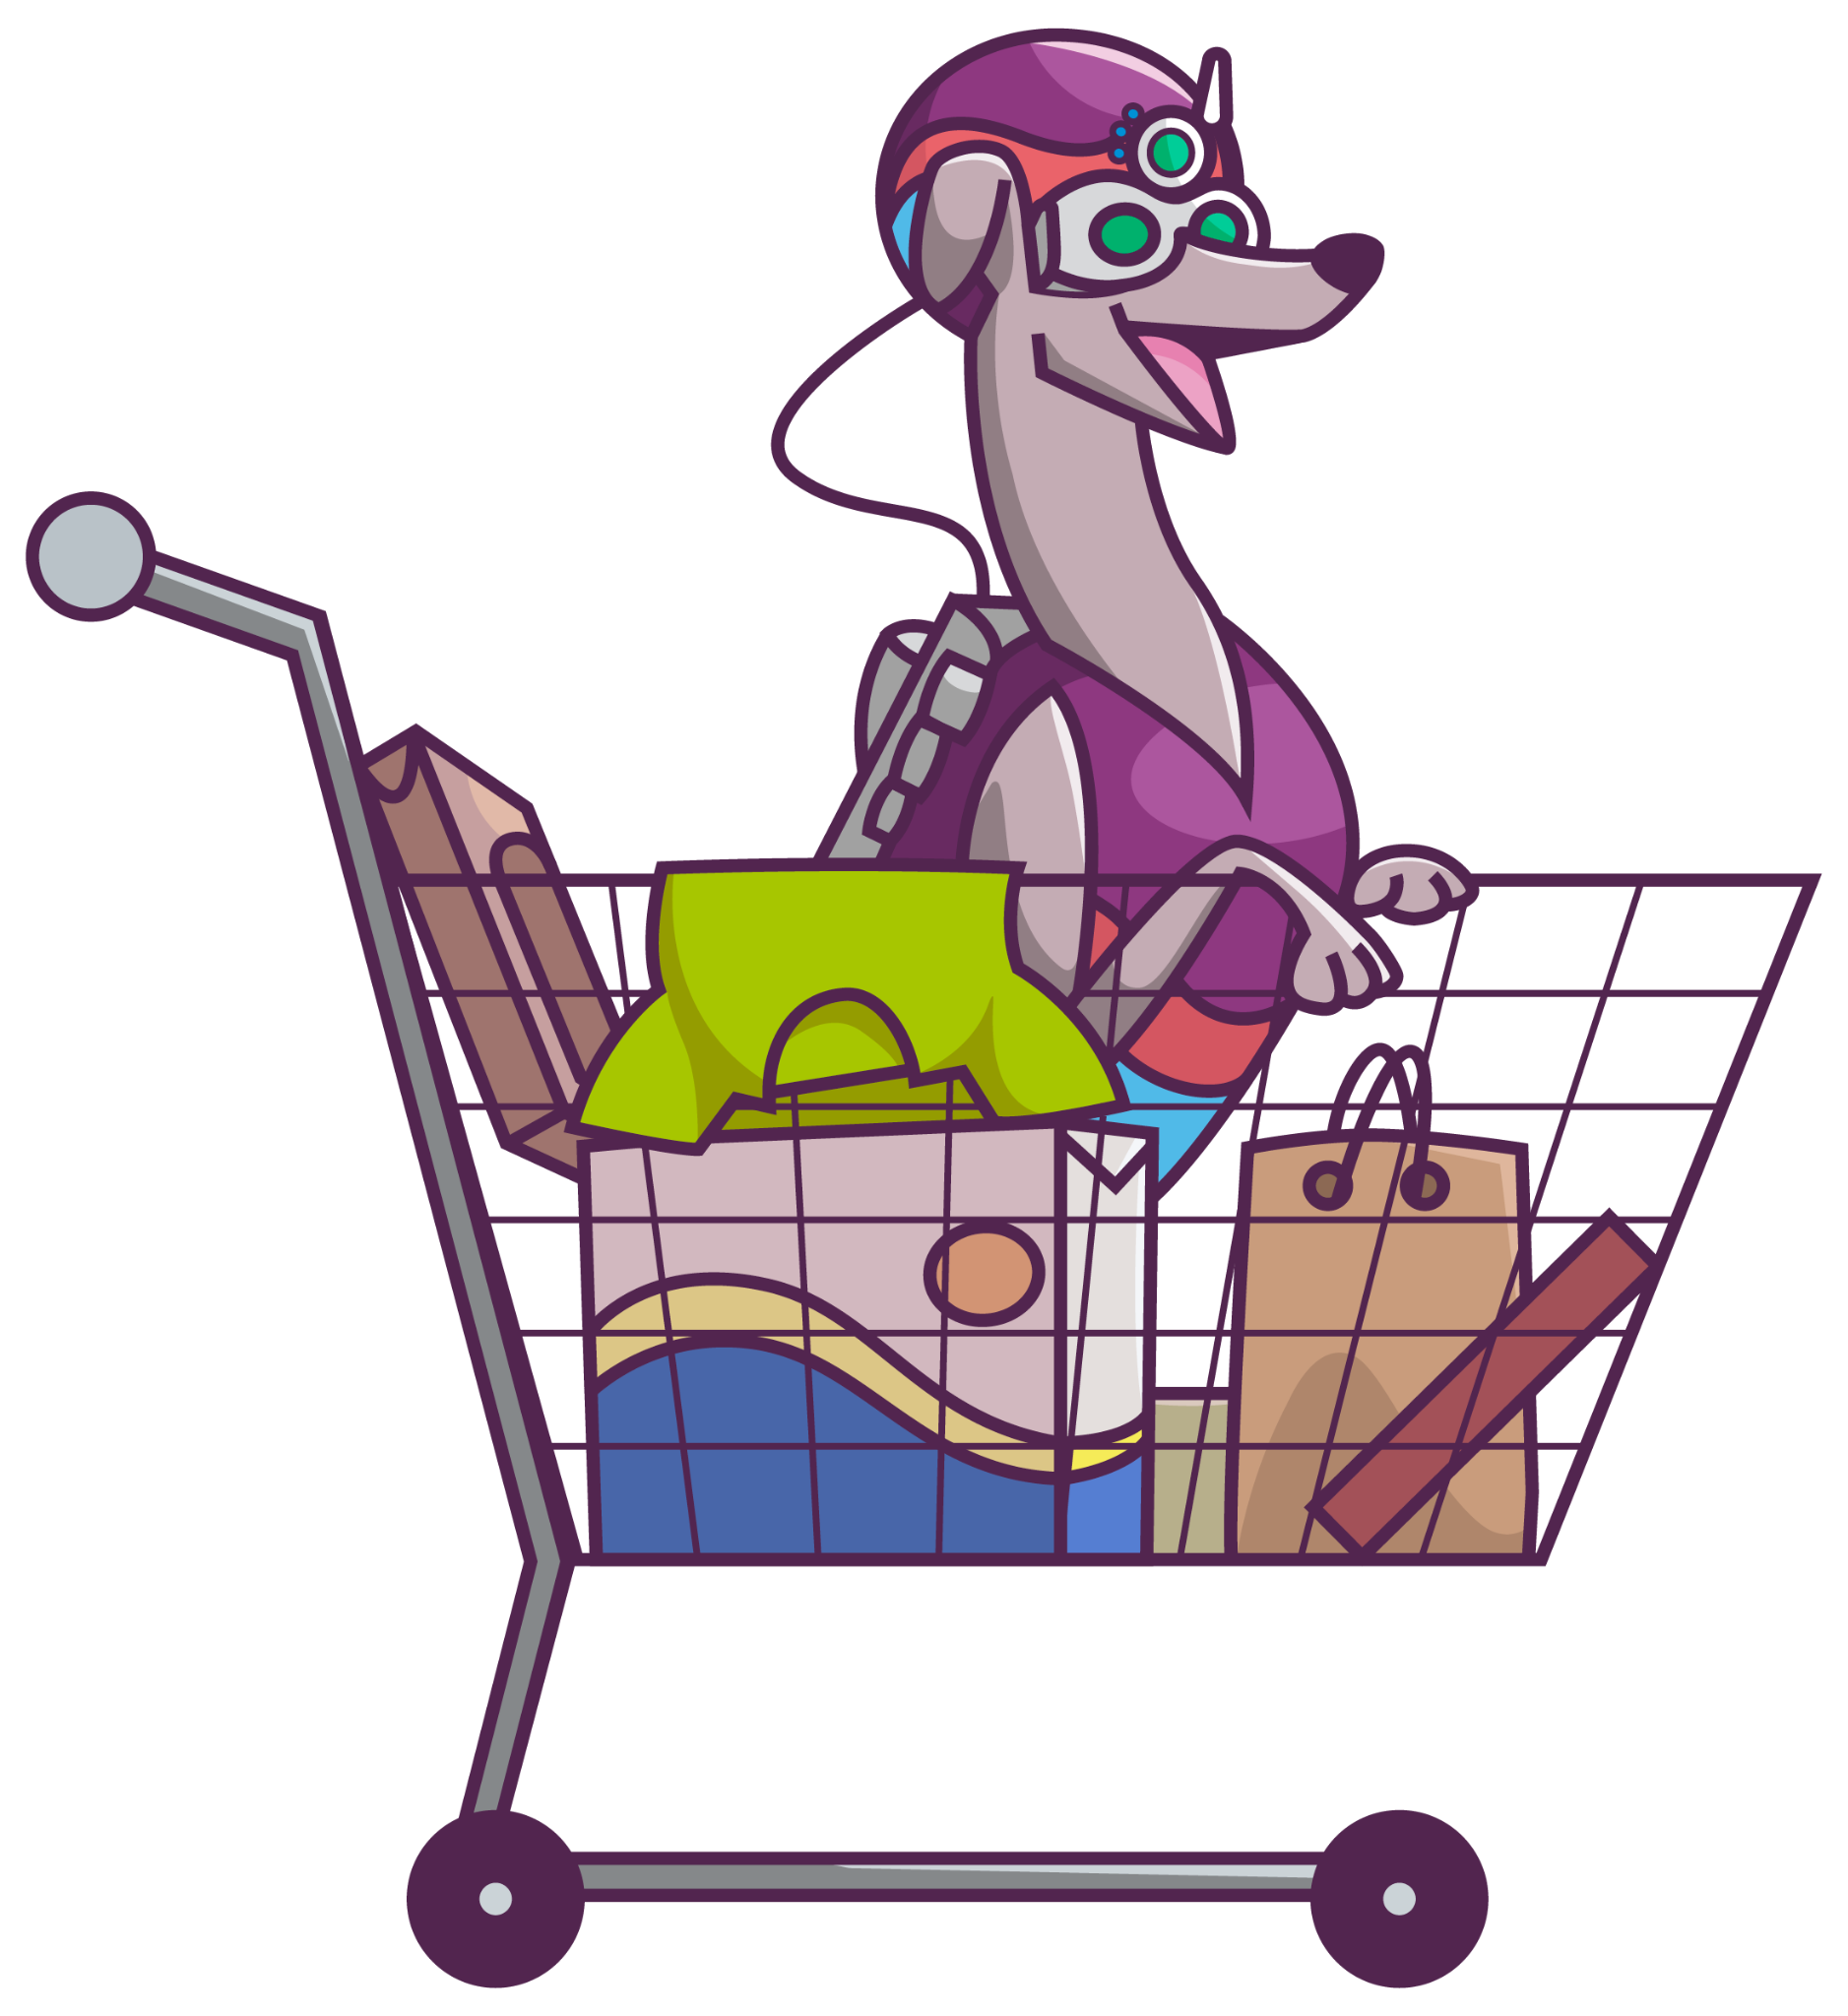 FiboSearch dog in a shopping cart icon